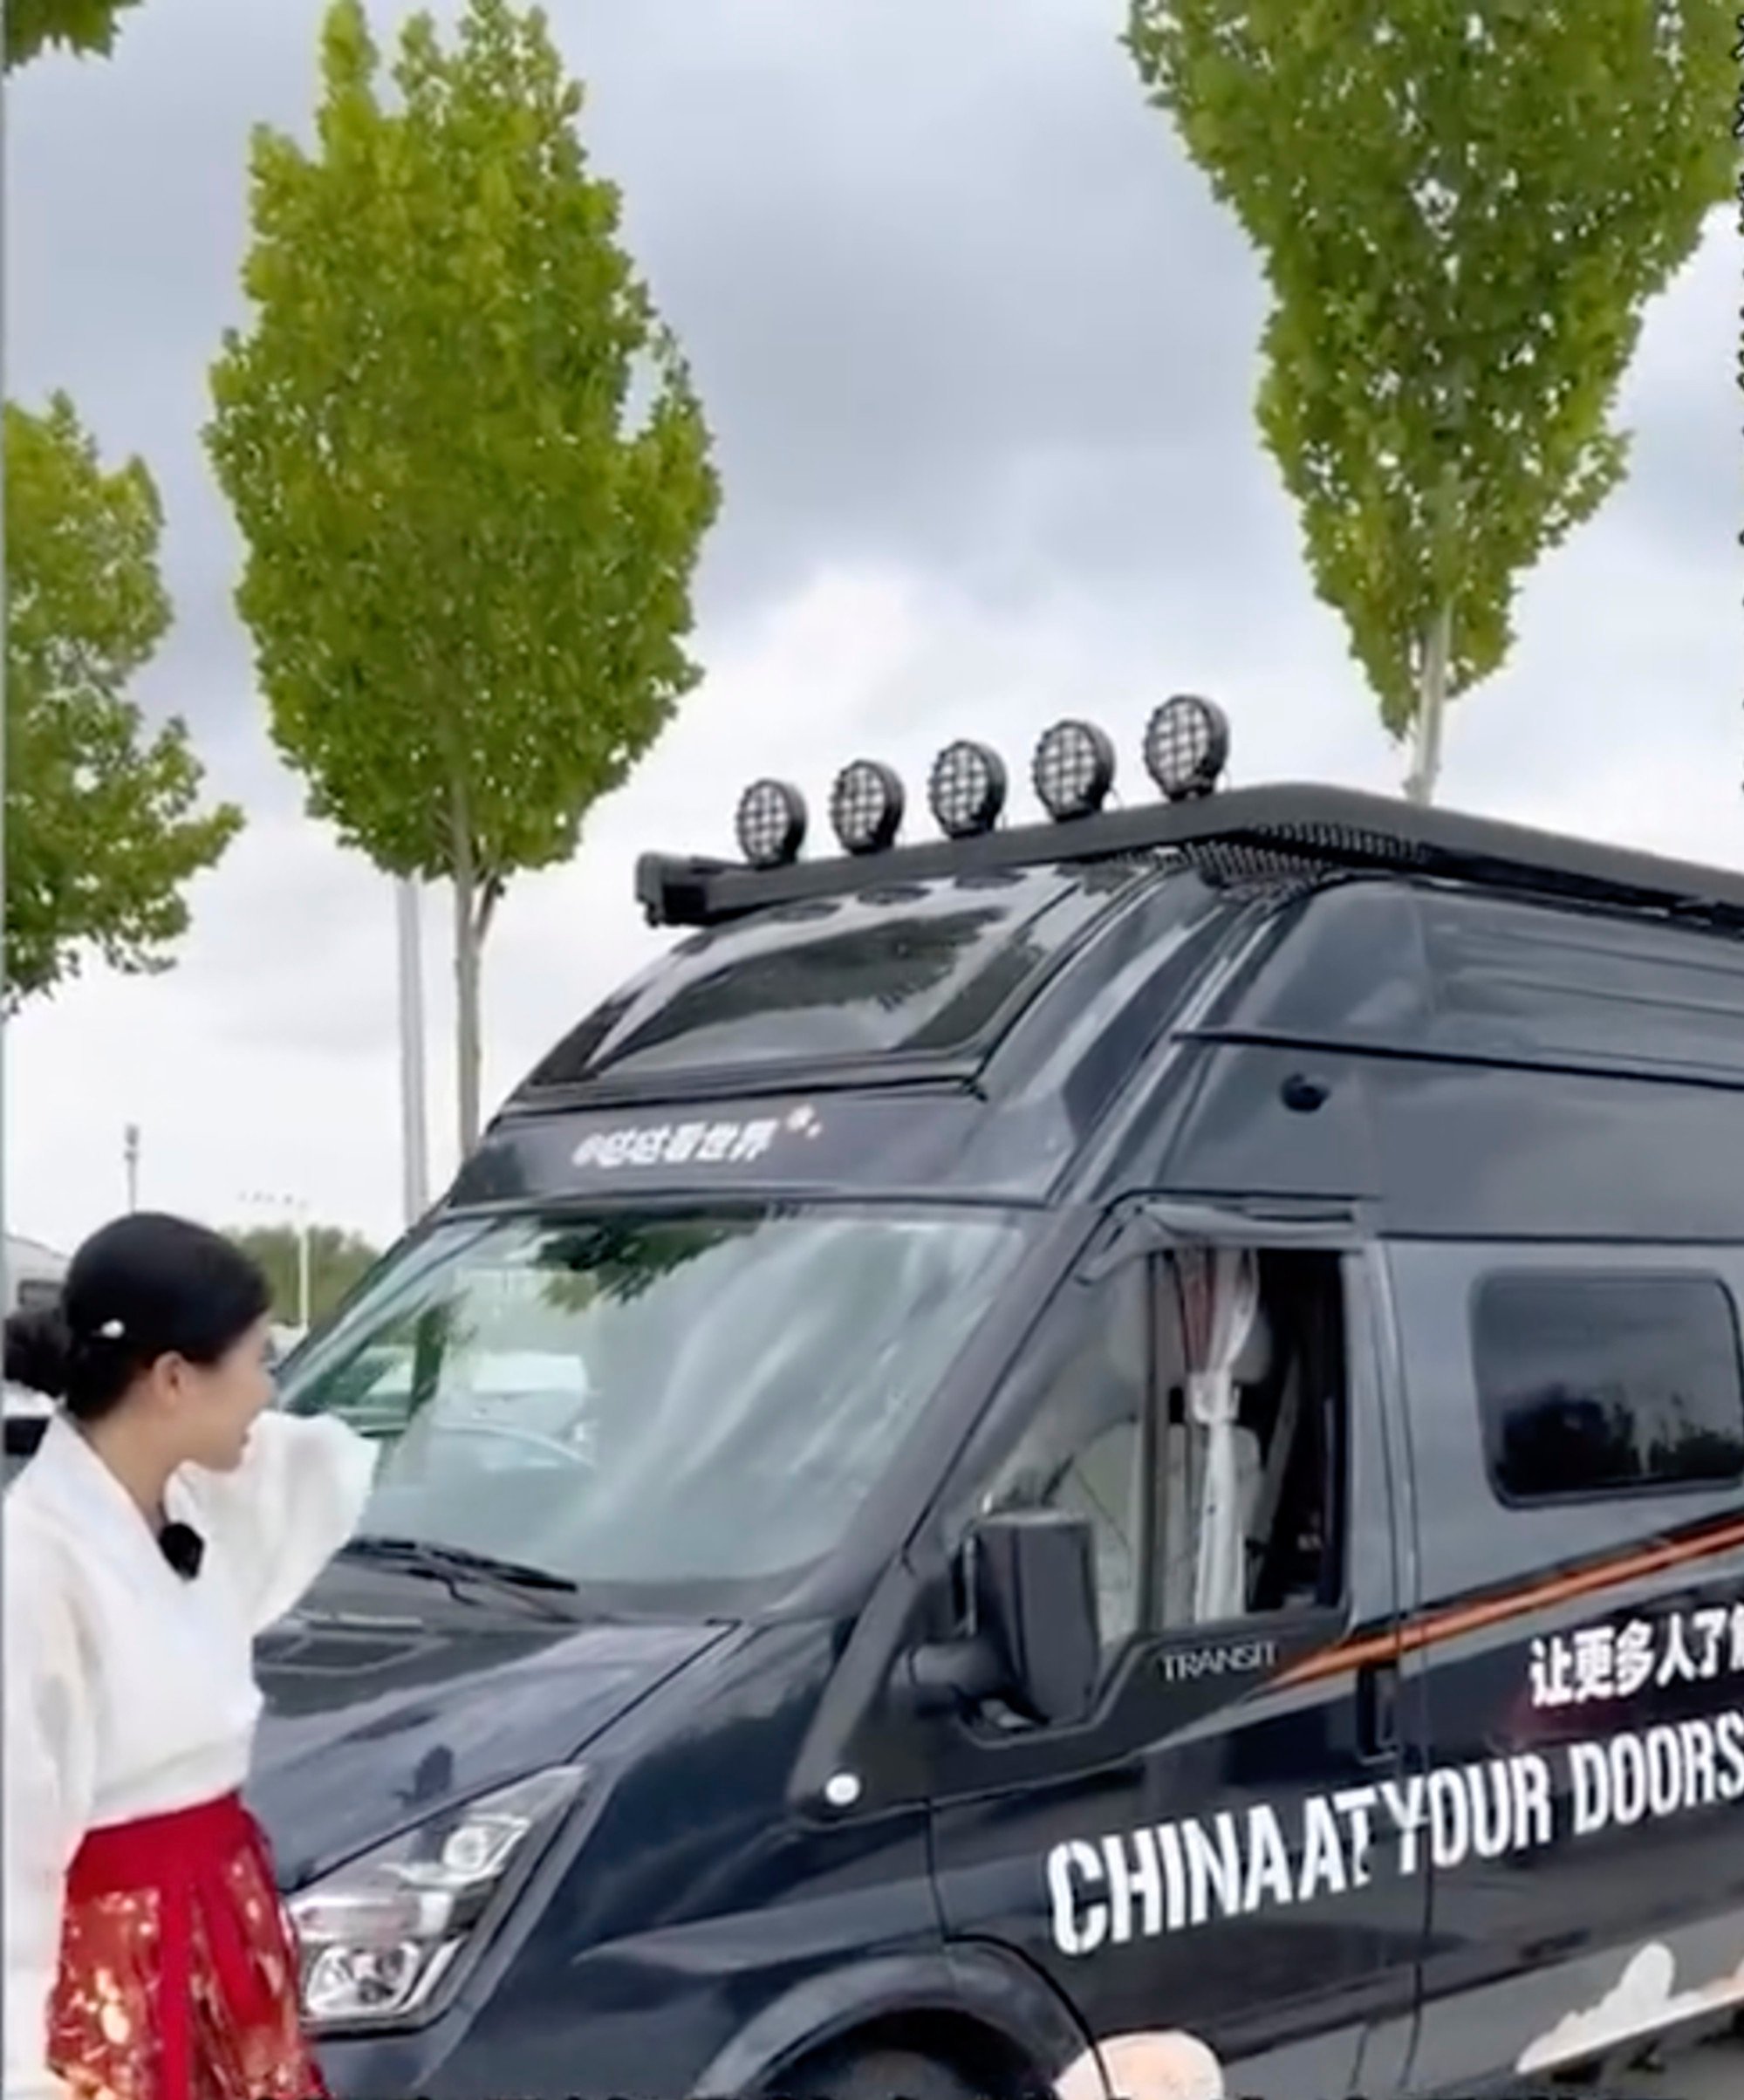 Yang Yue travels in a van emblazoned with slogans inviting people around the world to engage with Chinese culture. Photo: Sina